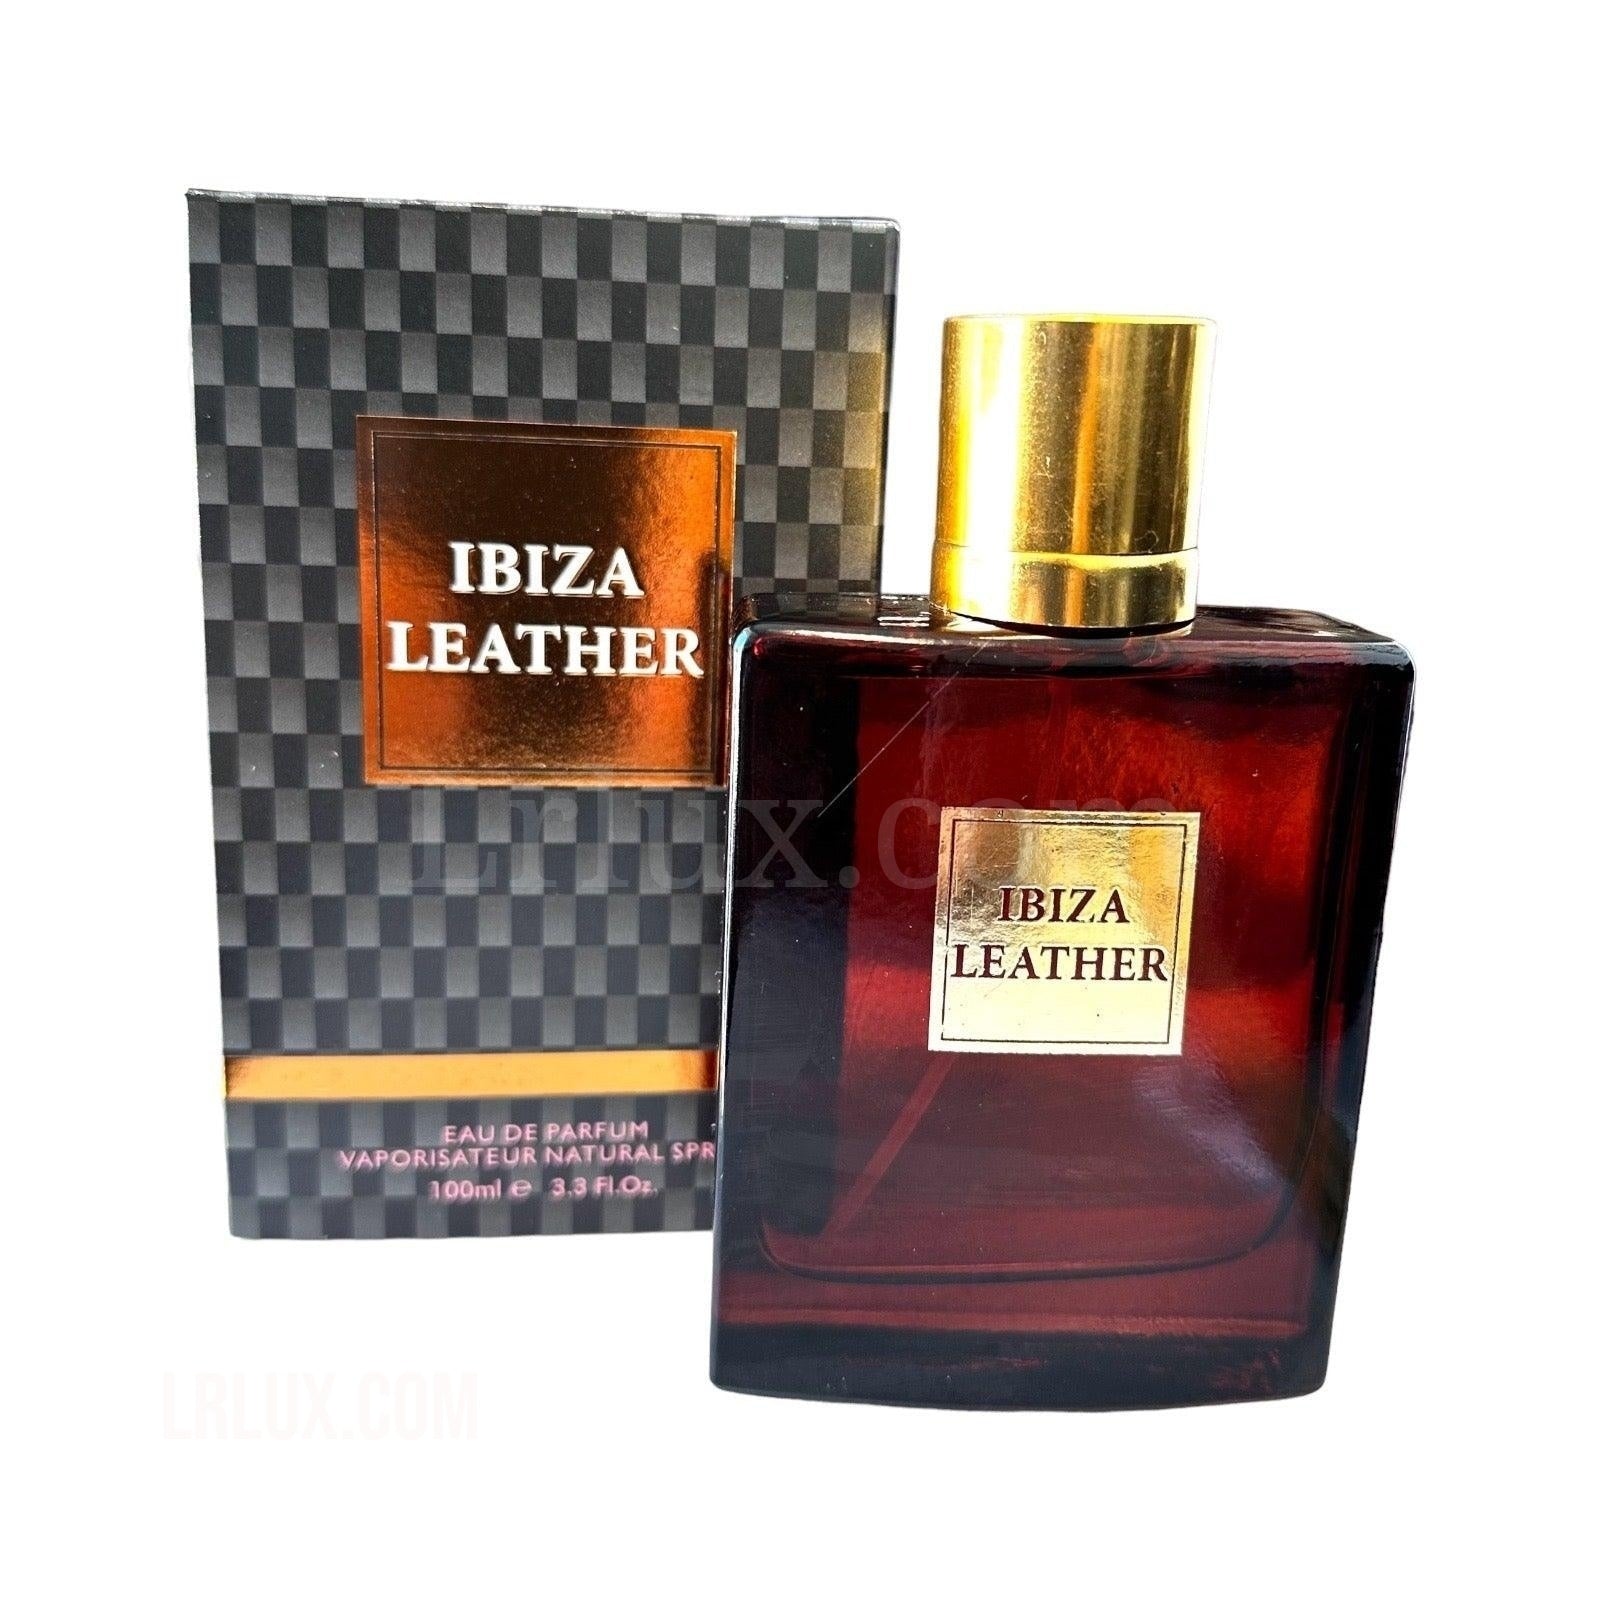 IBIZA LEATHER FOR MEN 3.4 OZ. INSPIRED ON TUSCAN LEATHER. - Lrlux.com